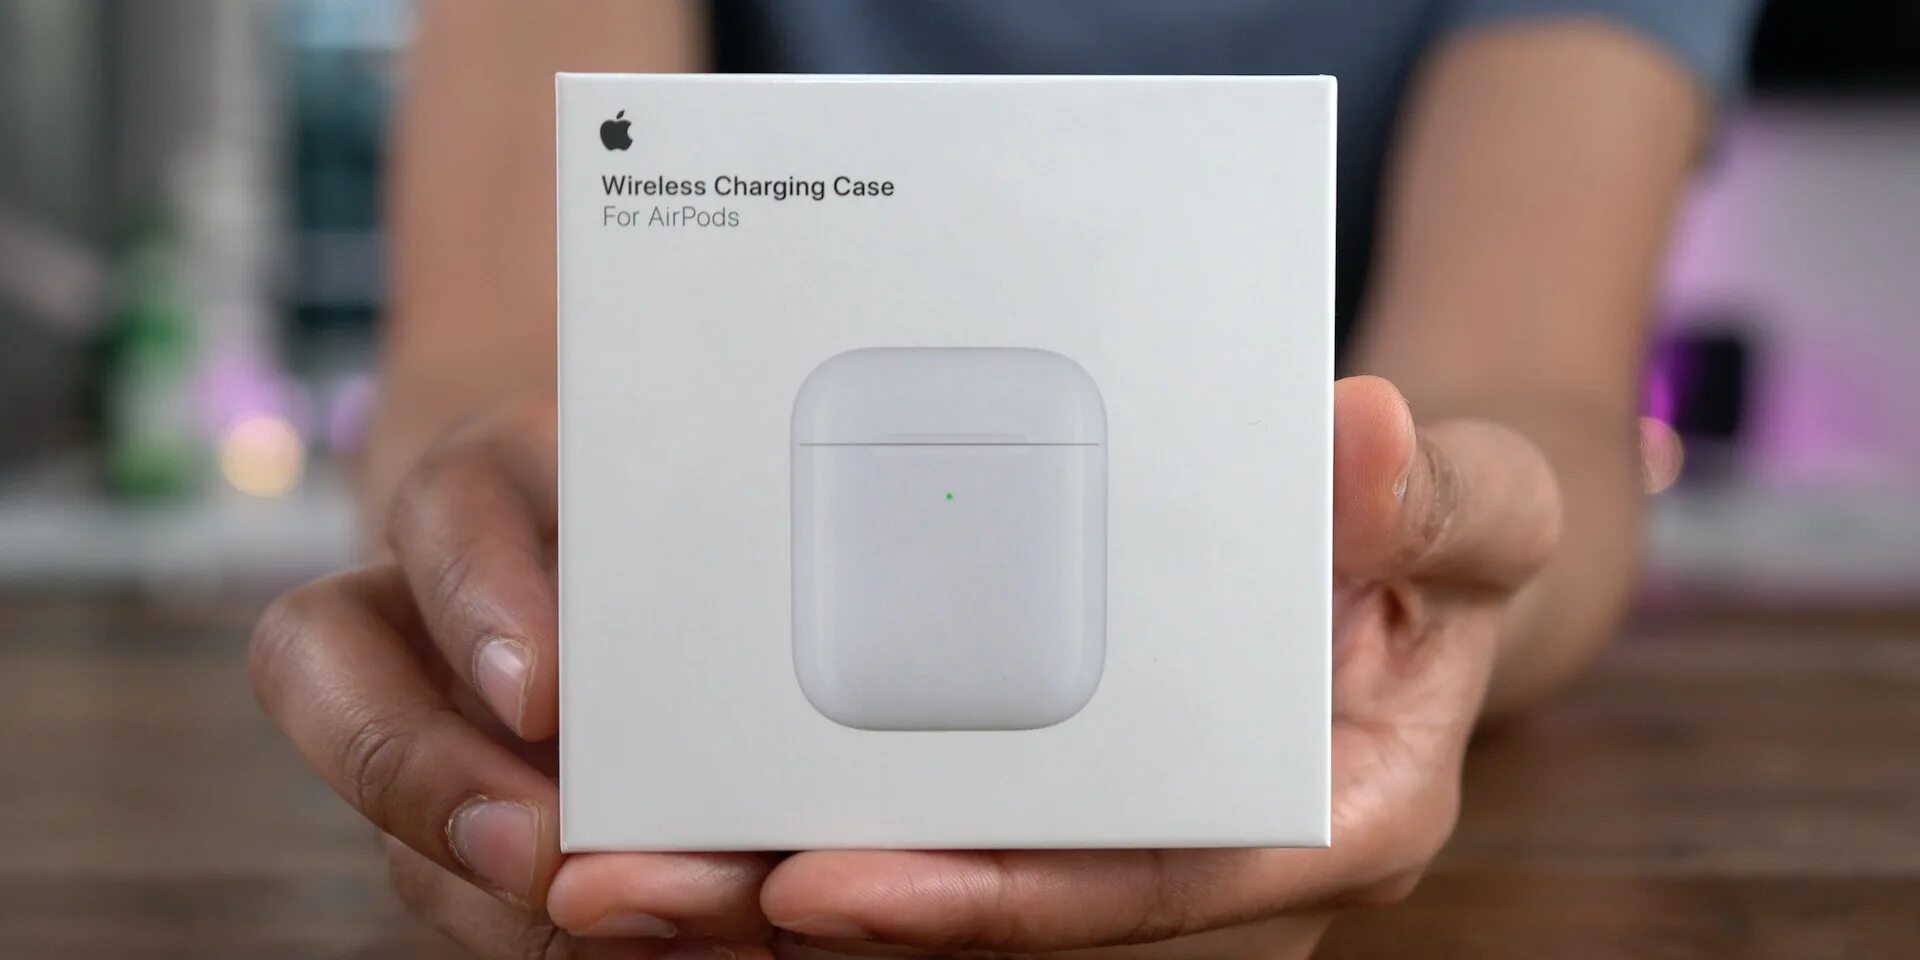 Airpods 2 чип. Apple AIRPODS 2 Wireless Charging Case. Apple AIRPODS Pro 2 with MAGSAFE Wireless Charging Case. Apple Wireless Charging Case for AIRPODS. AIRPODS Wireless Charging Case коробка.